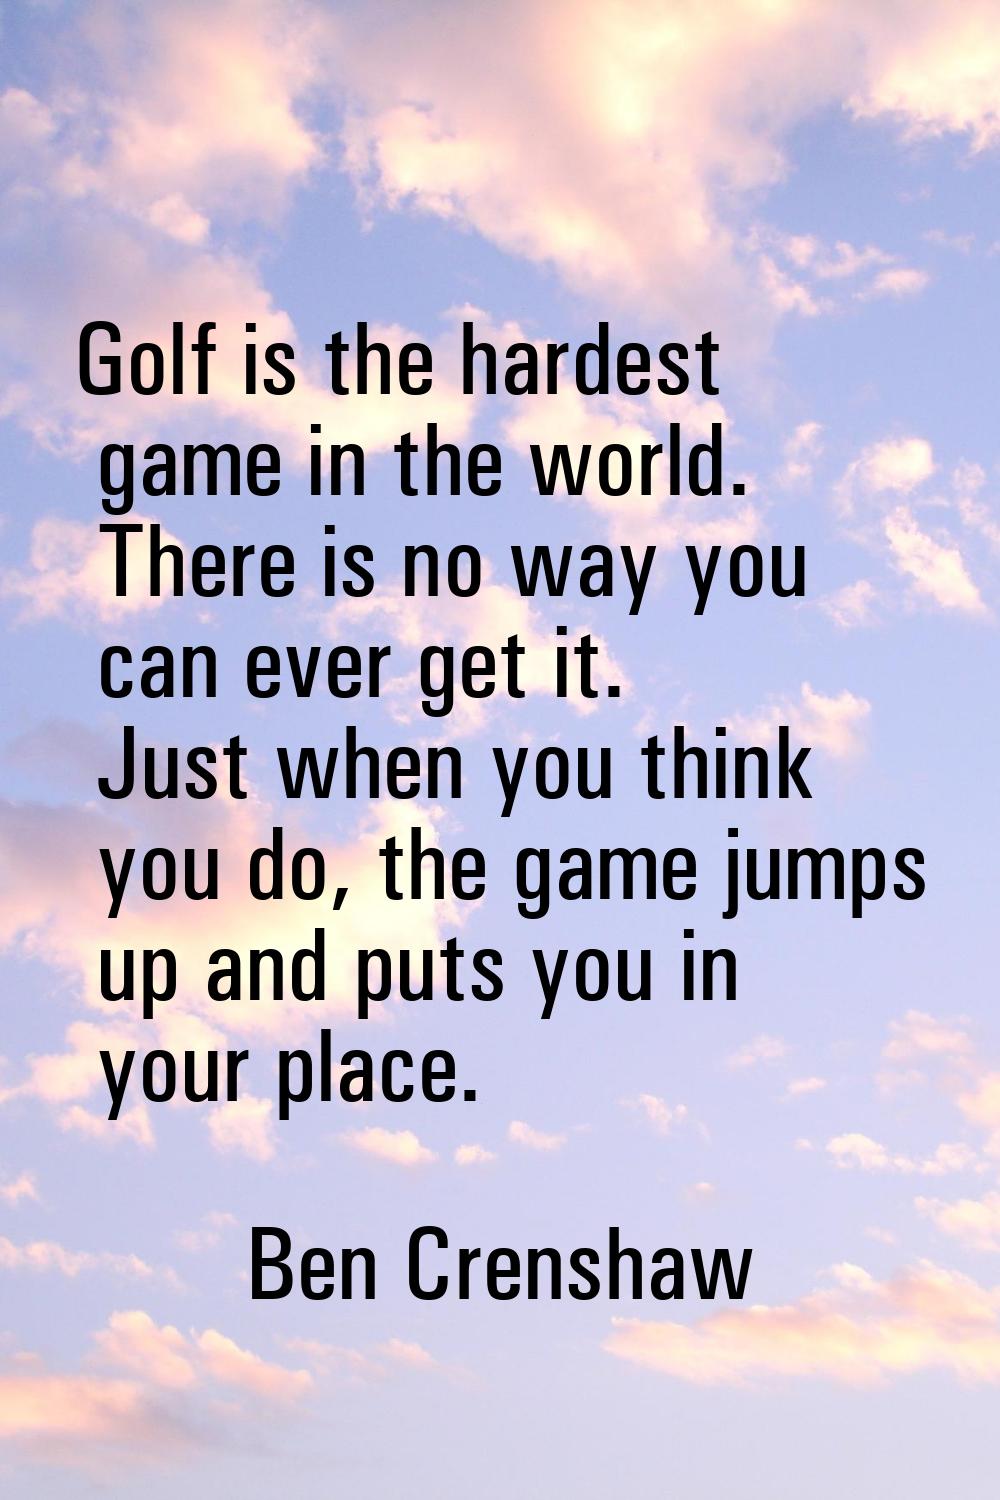 Golf is the hardest game in the world. There is no way you can ever get it. Just when you think you